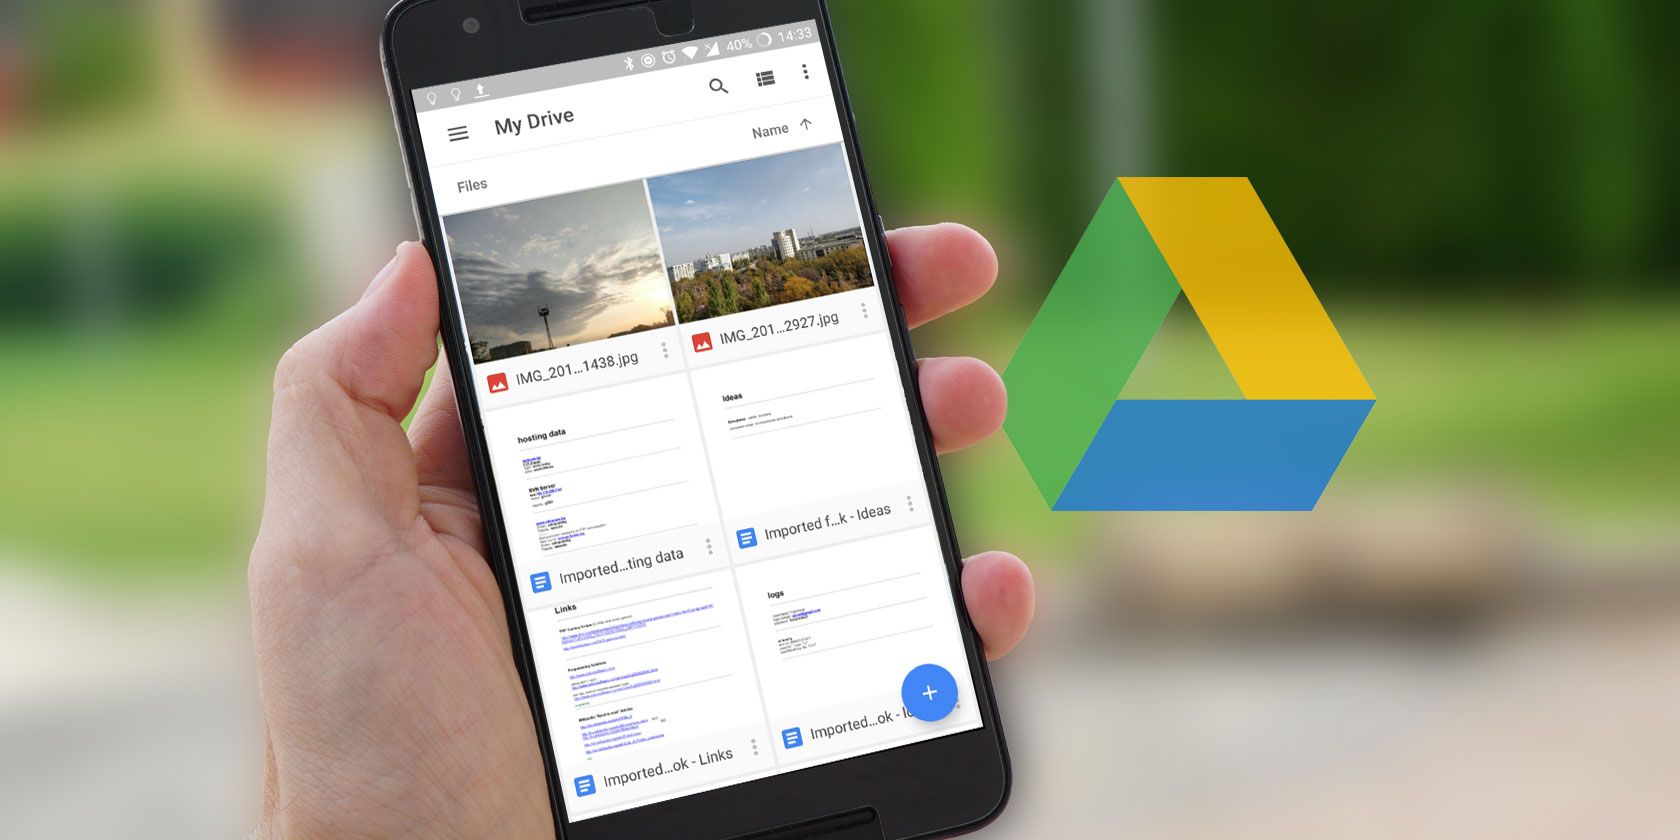 google drive app for android isnt rexponding